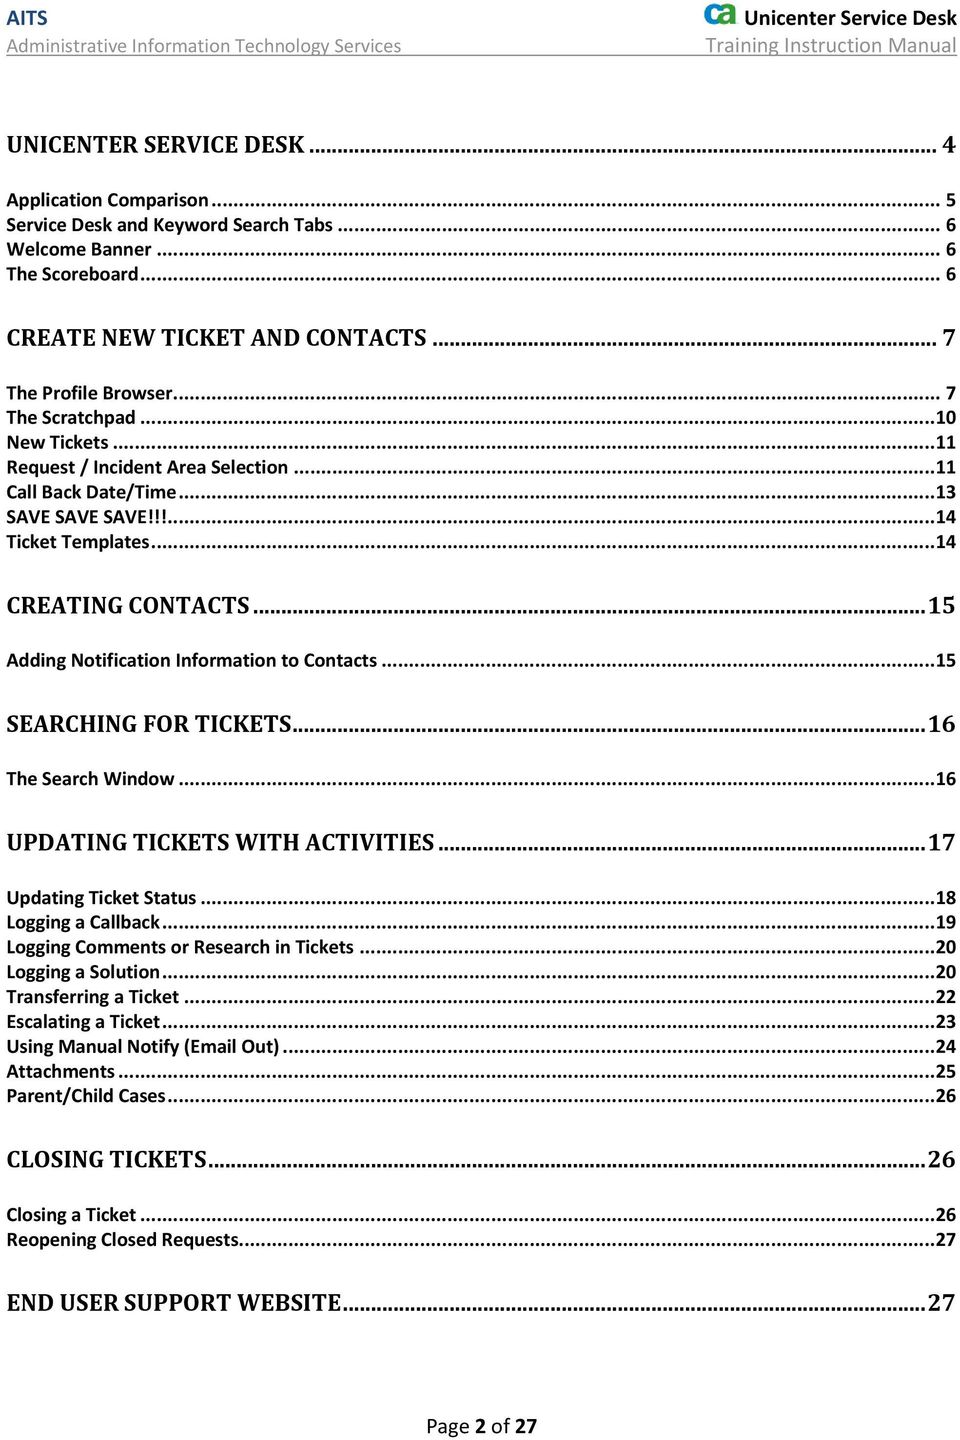 .. 15 Adding Notification Information to Contacts... 15 SEARCHING FOR TICKETS... 16 The Search Window... 16 UPDATING TICKETS WITH ACTIVITIES... 17 Updating Ticket Status... 18 Logging a Callback.